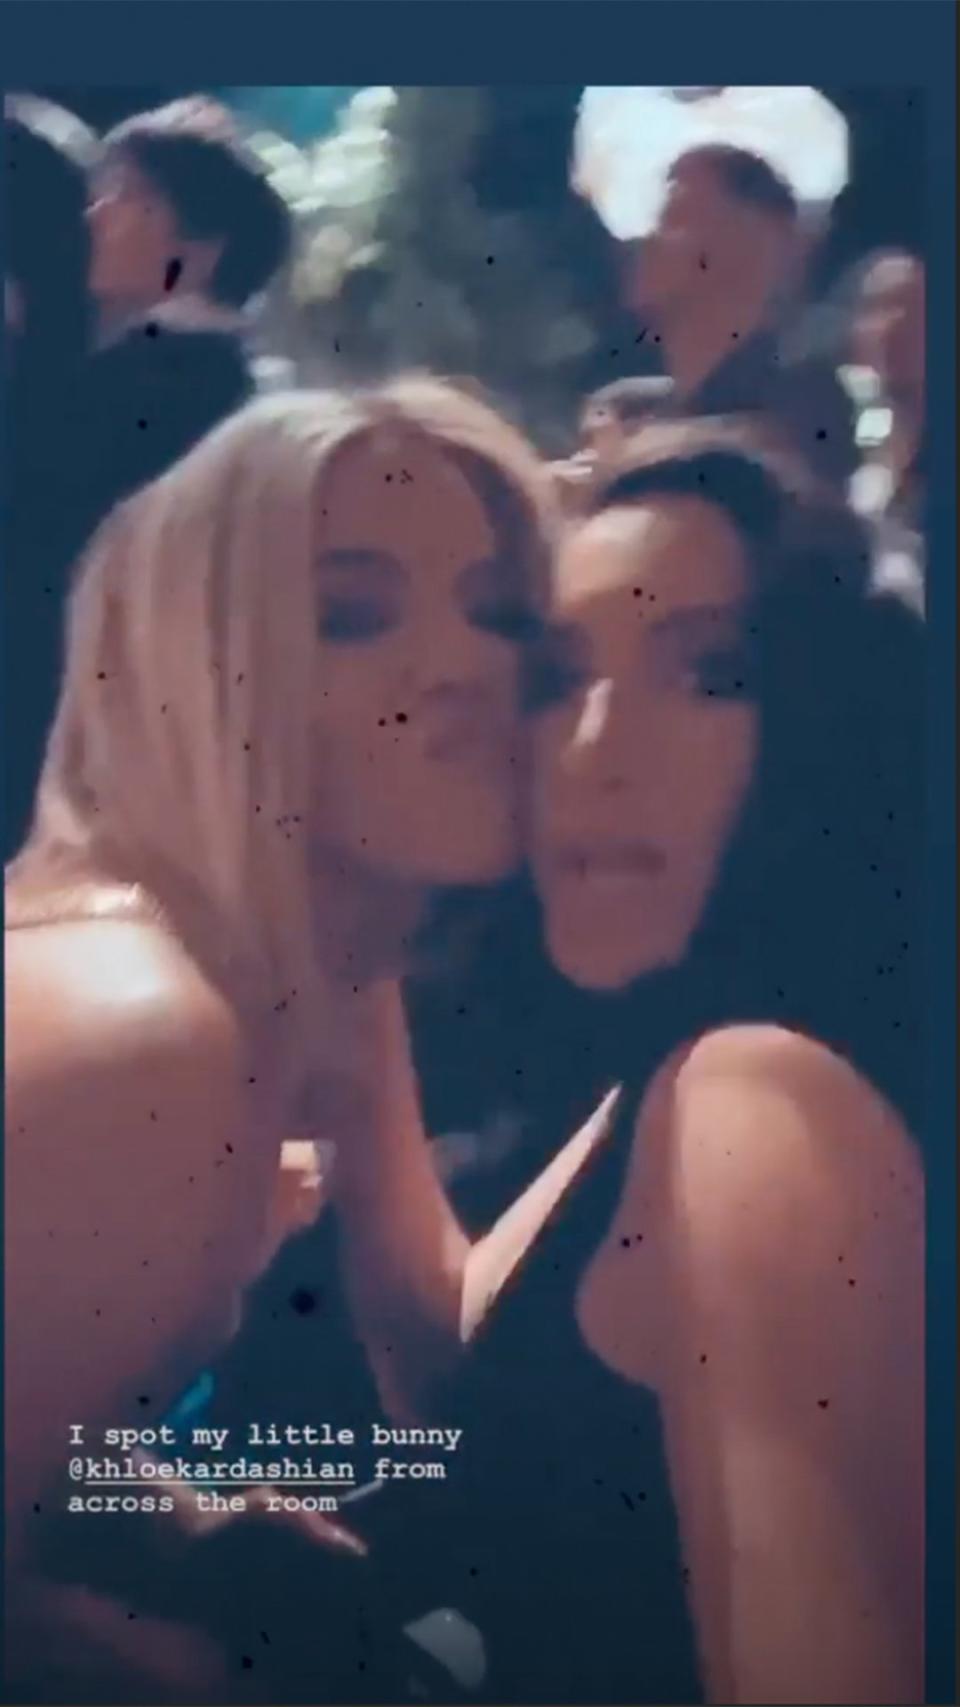 Atkin also took a quick Instagram video with Khloé, her "little bunny."